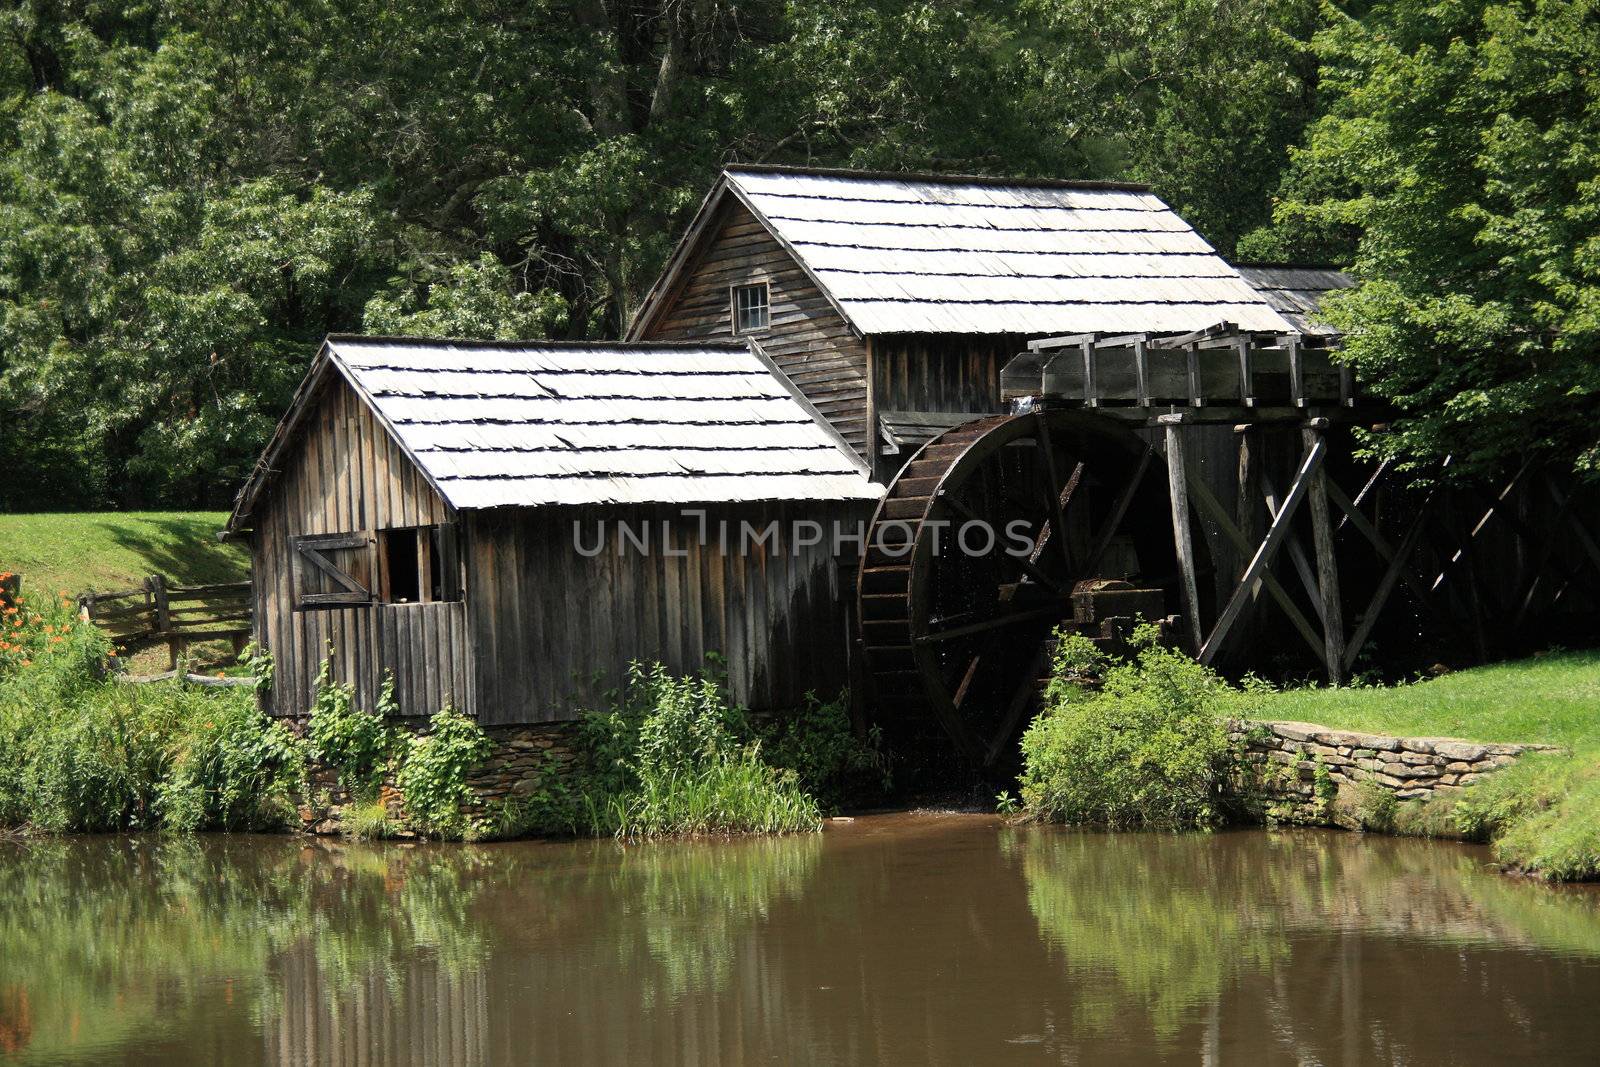 Historic grist mill found along scenic byway in Blue Ridge Mountains.